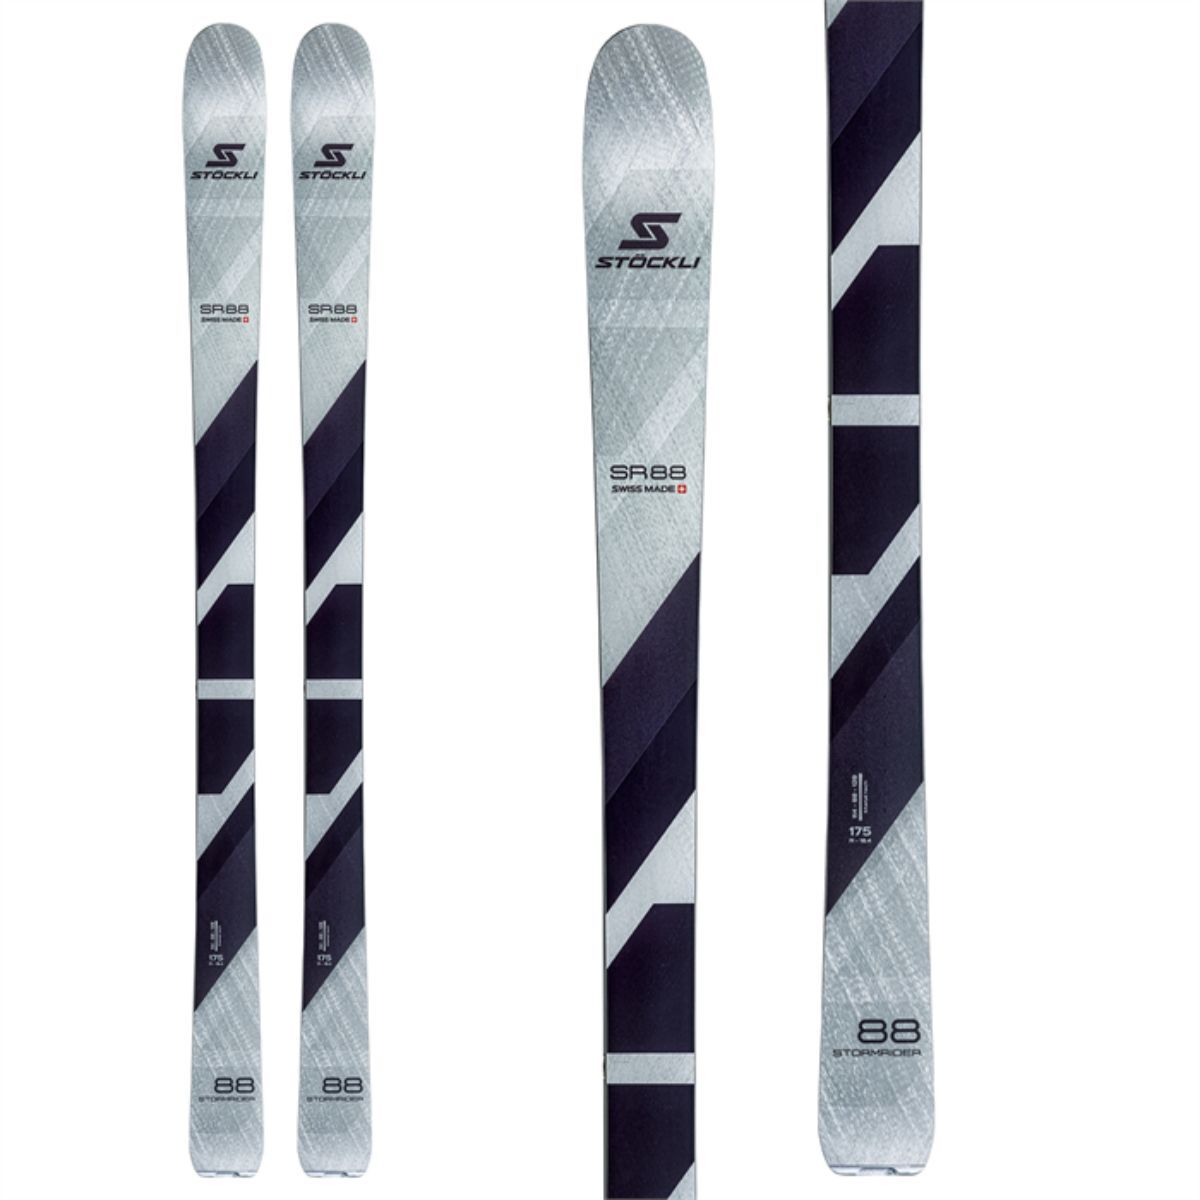 Skis for Sale: Mens' & Womens' Snow Skis | Christy Sports